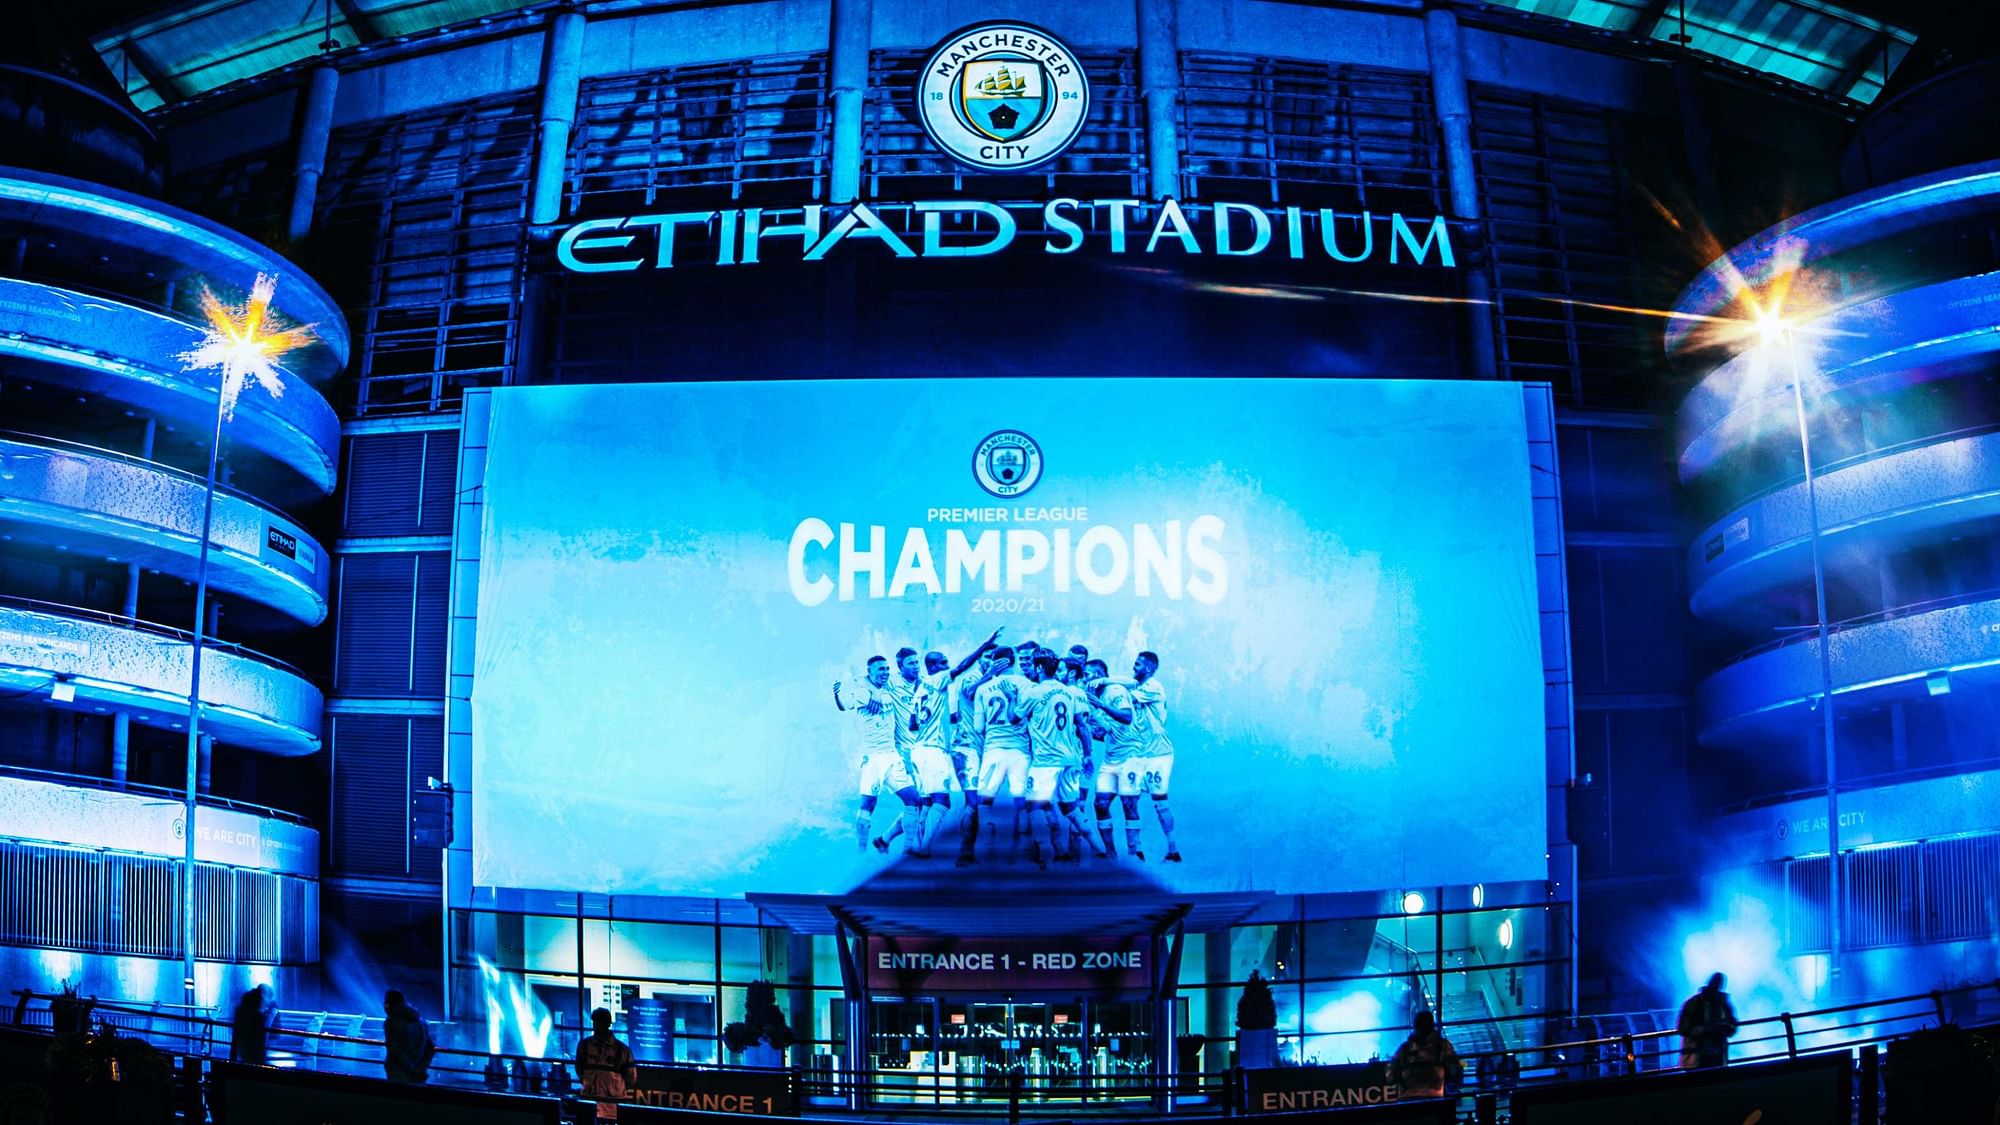 Manchester City were confirmed as Premier League champions on Tuesday night.